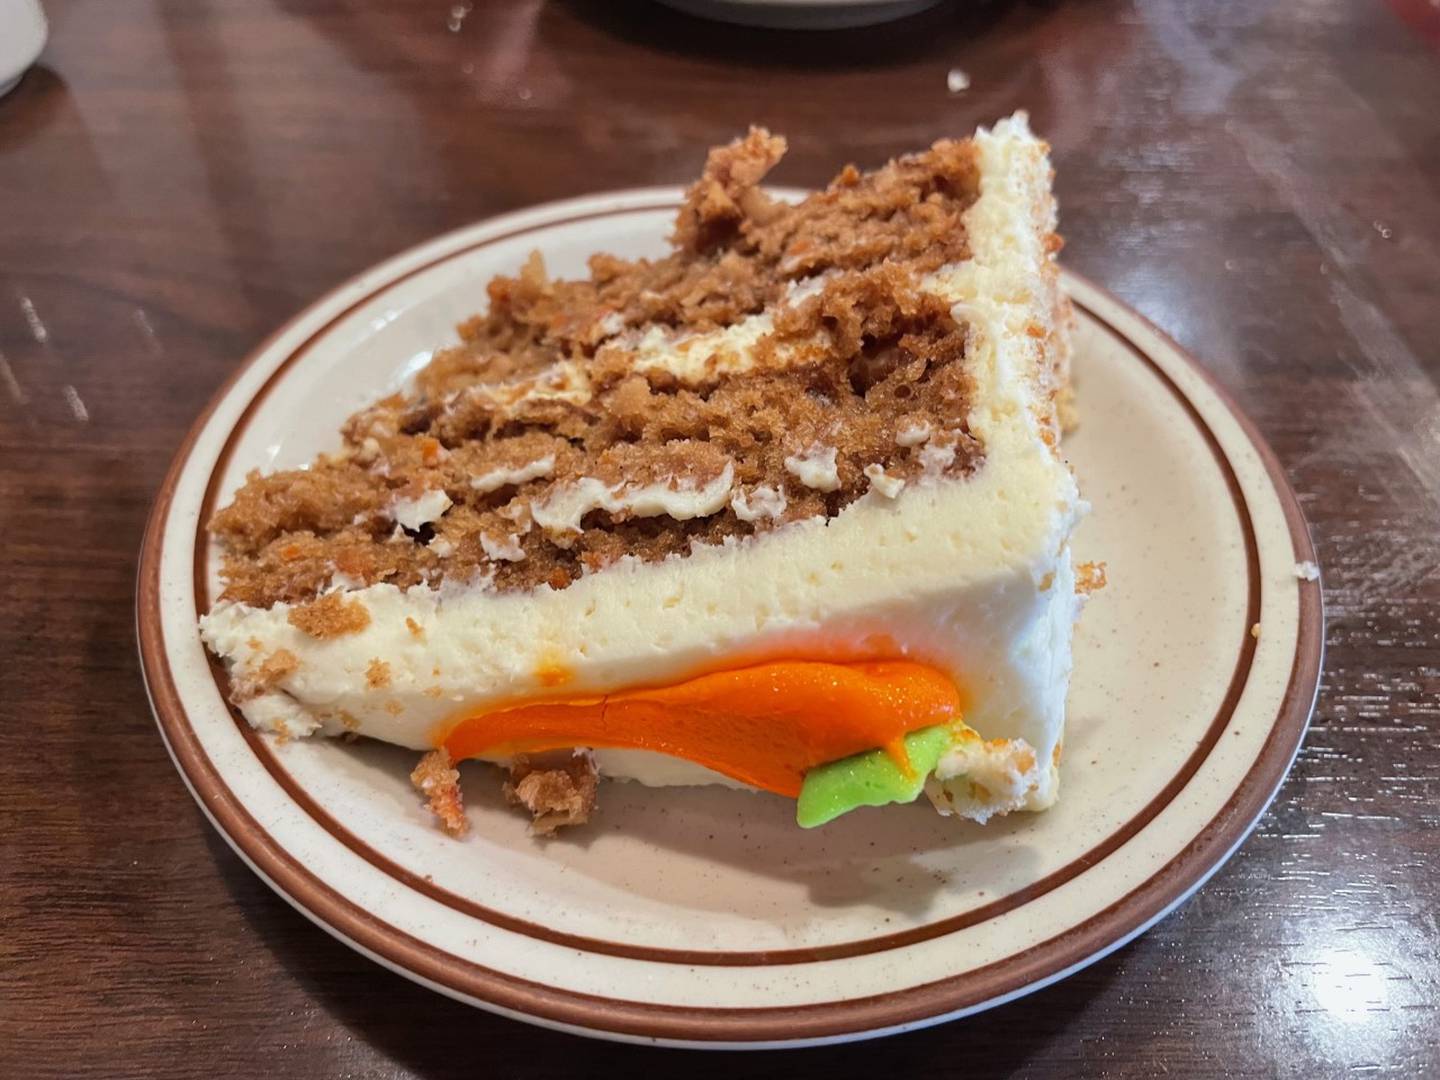 Four Star Family Restaurant has a dessert case facing the front door, making it hard to pass up sweet treats such as carrot cake.